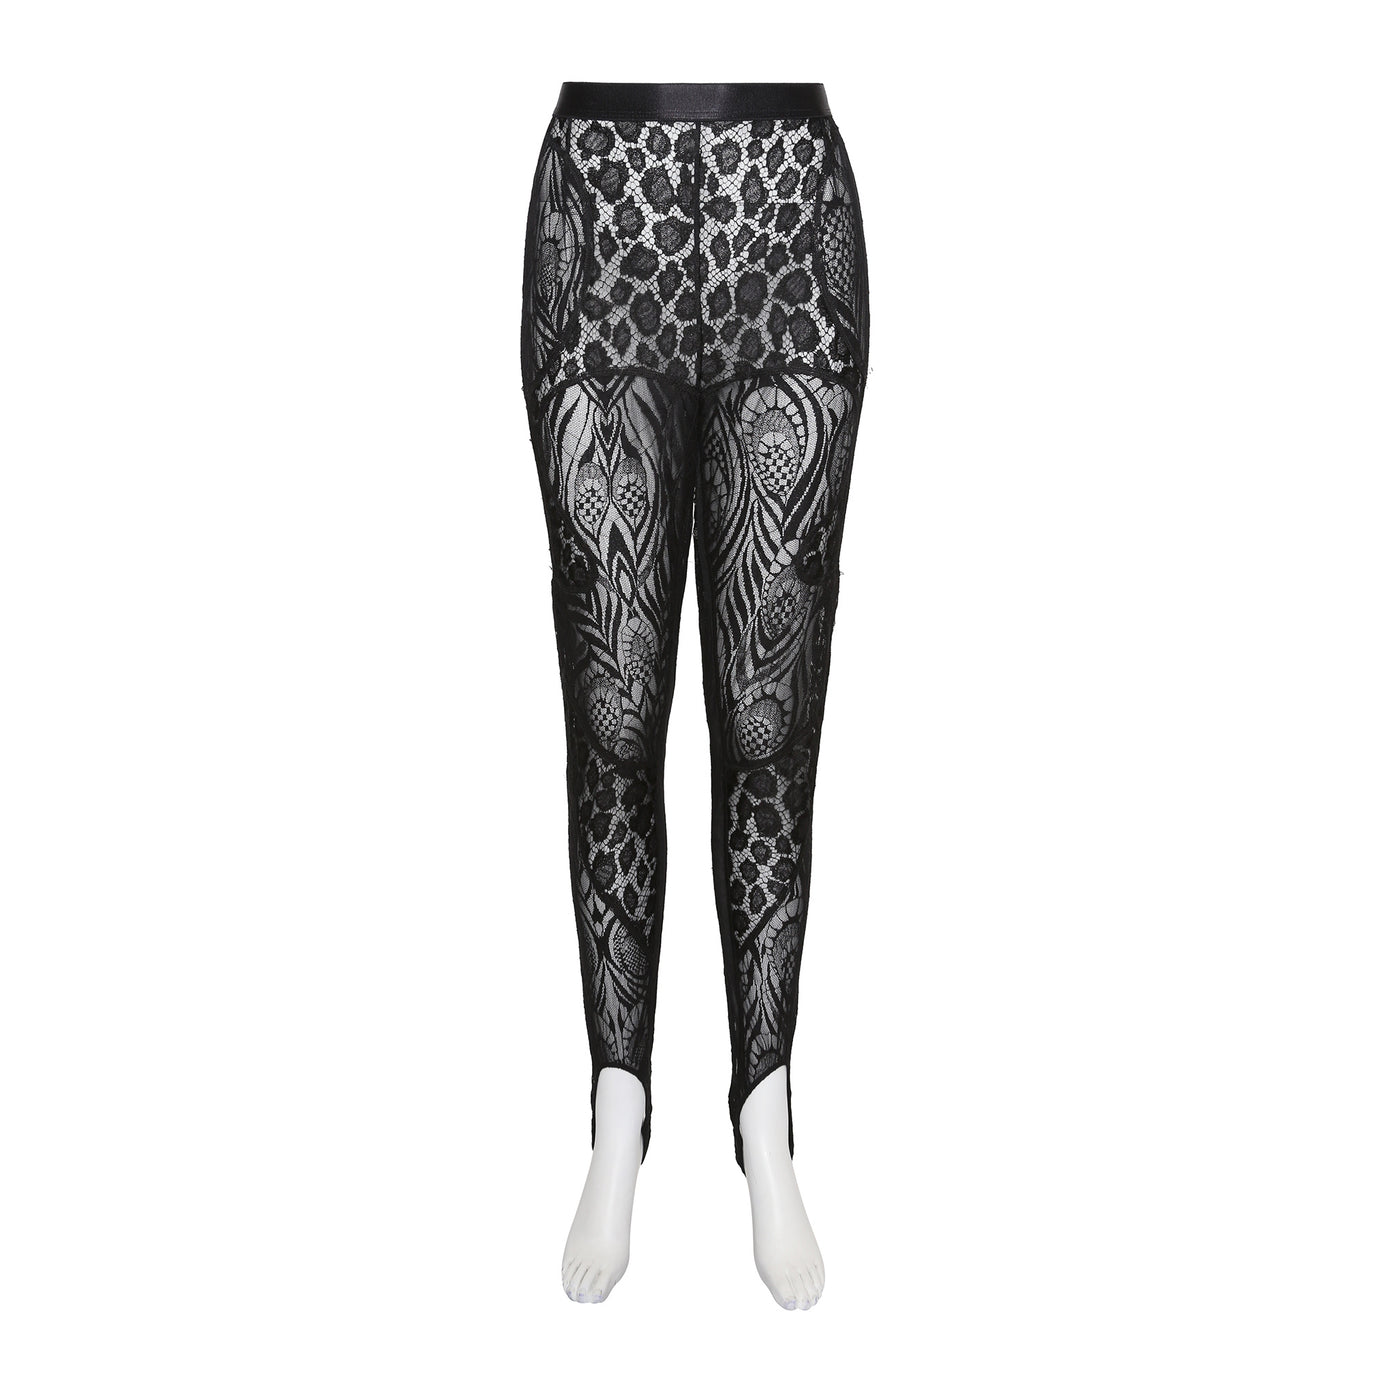 Tom Ford Lace Leggings with Stirrups